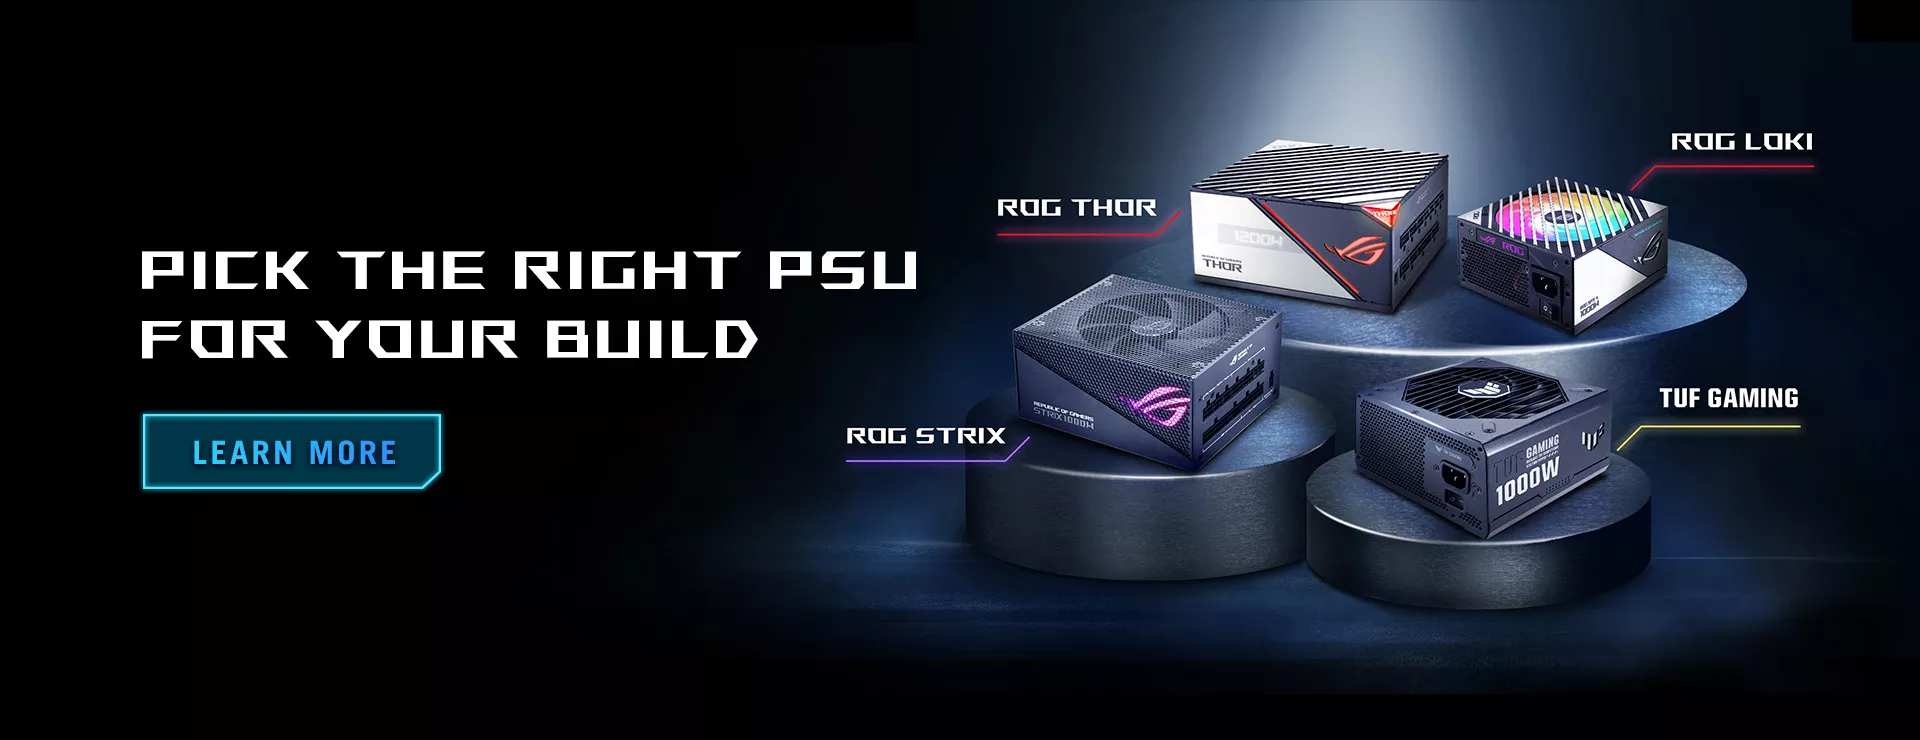 Pick the right PSU for your build, learn more, ROG Thor, ROG Strix, TUF Gaming, ROG Loki. ASUS power supply series banner